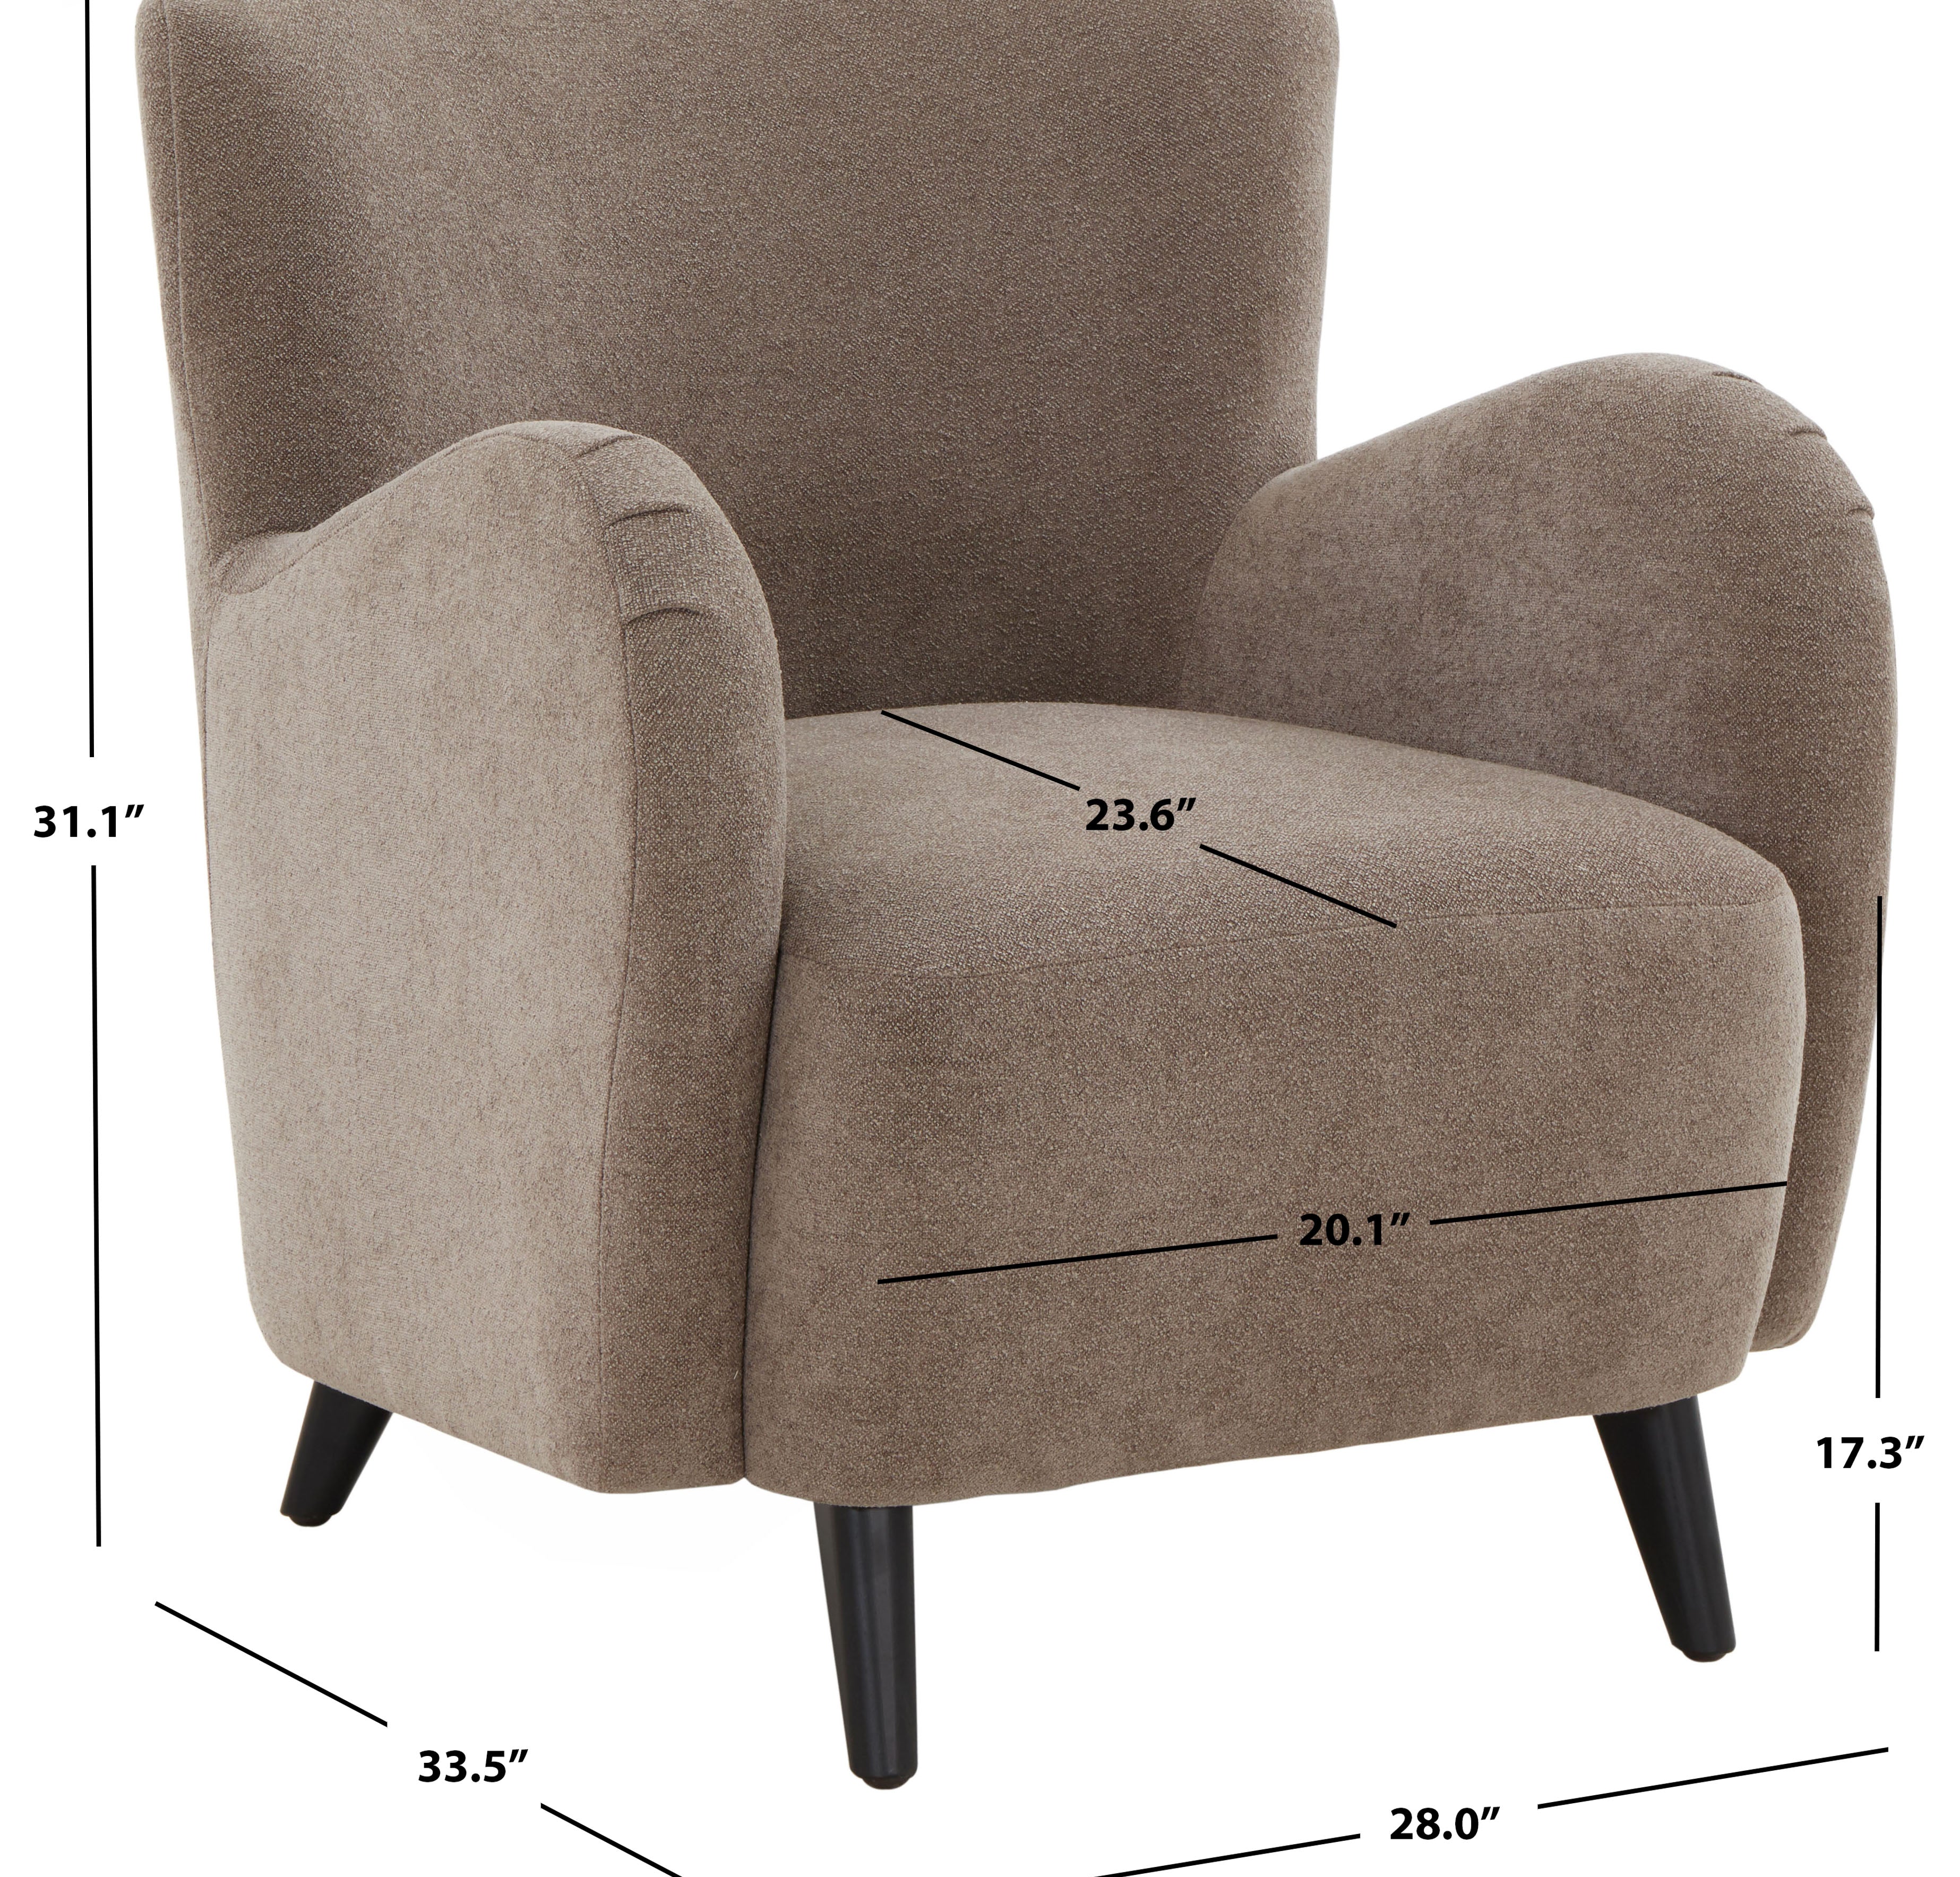 Safavieh Couture Rayanne Mosern Wingback Chair